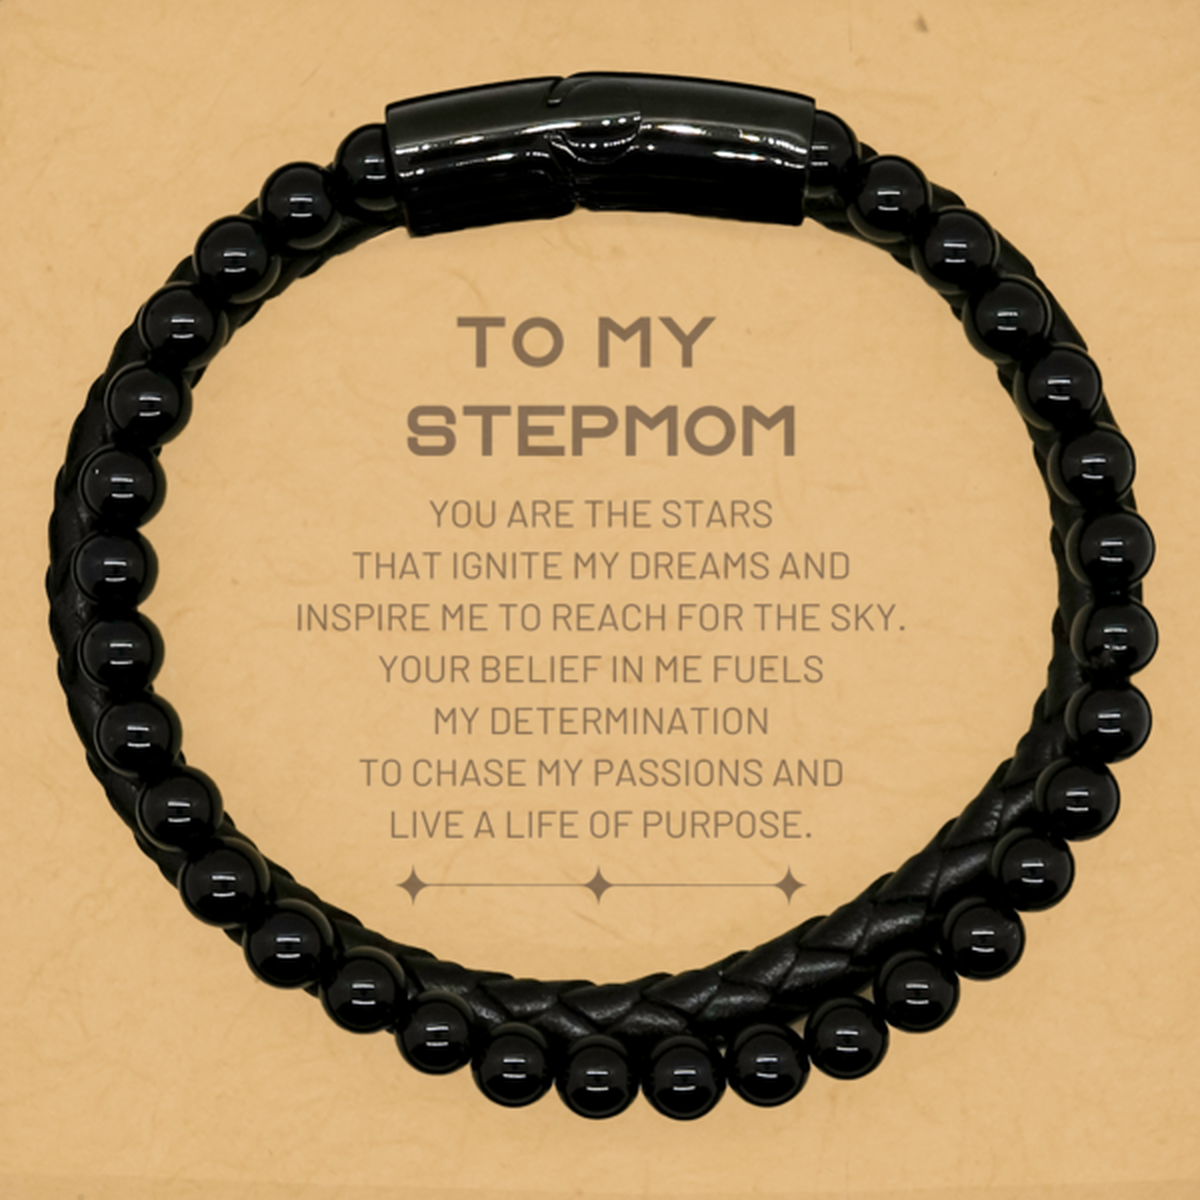 To My Stepmom Stone Leather Bracelets, You are the stars that ignite my dreams and inspire me to reach for the sky, Birthday Unique Gifts For Stepmom, Thank You Gifts For Stepmom